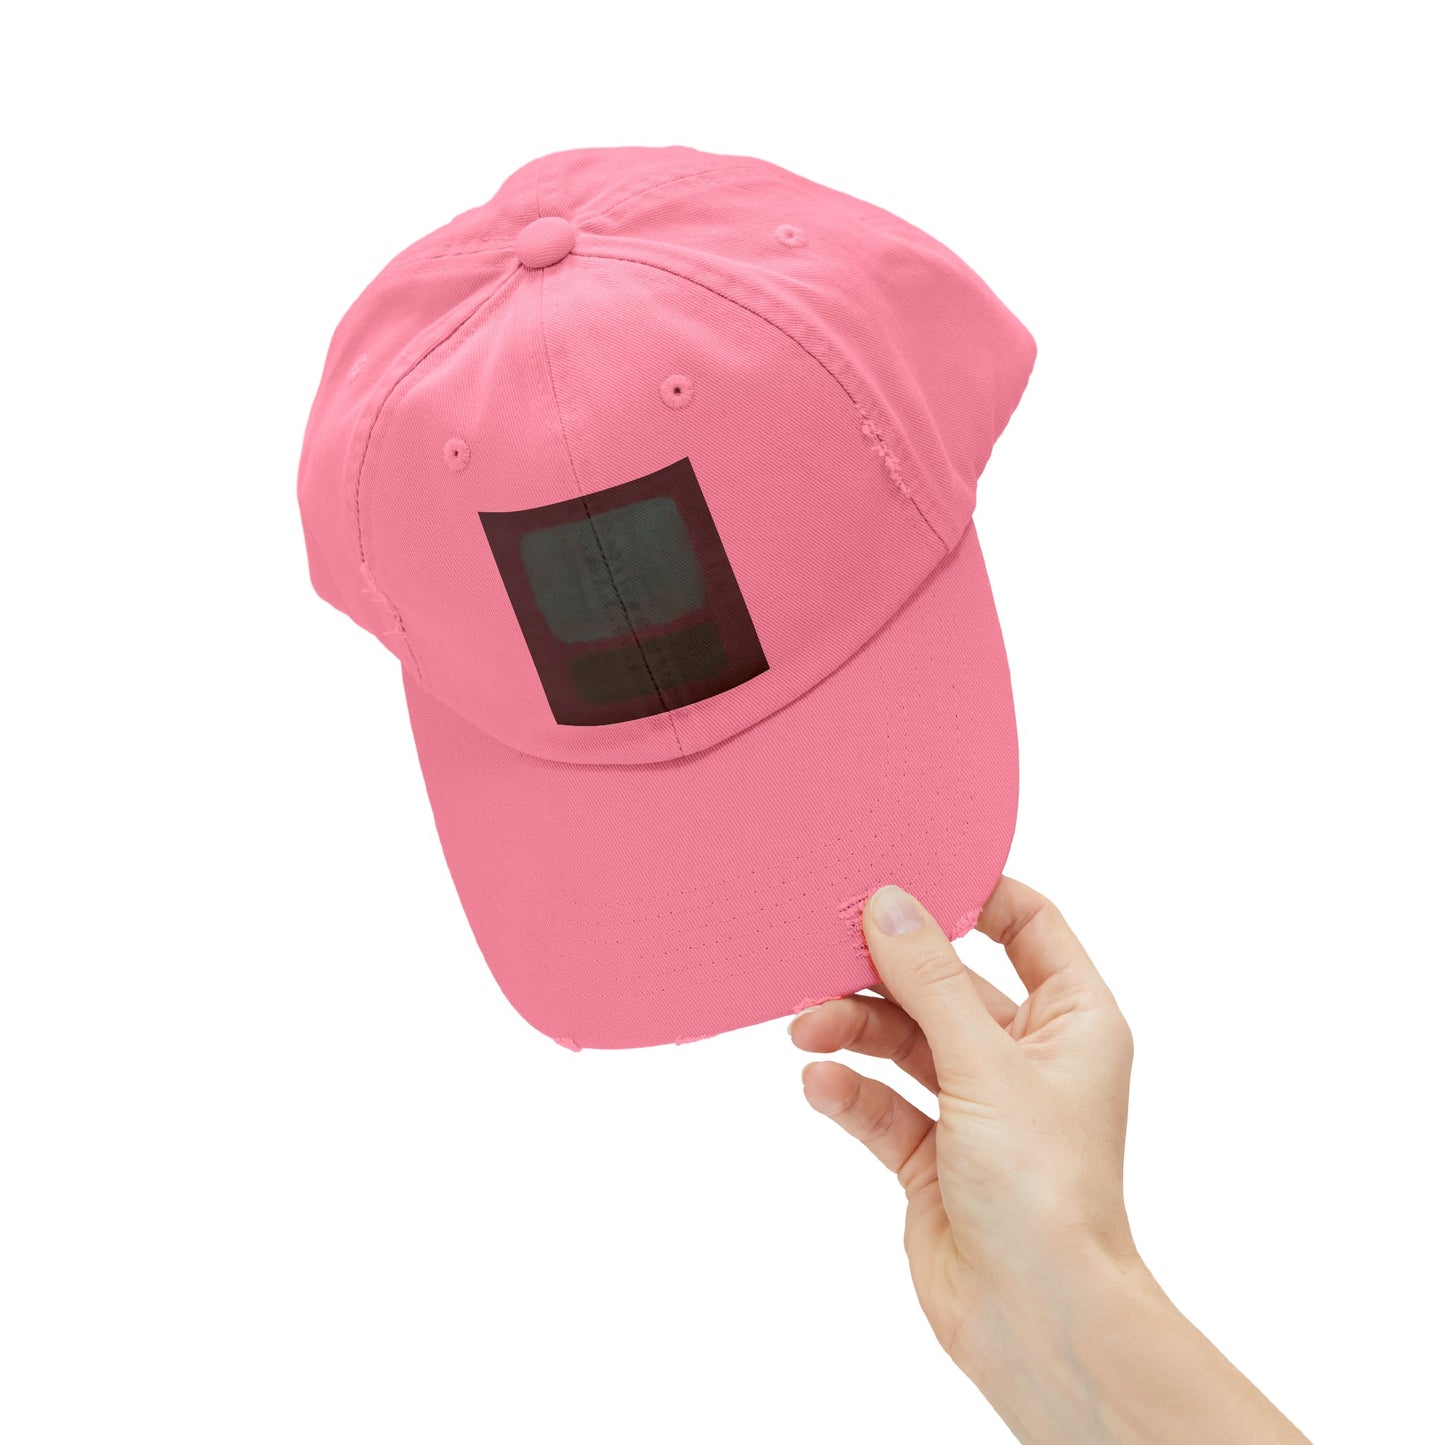 a person holding a pink hat with a black square on it